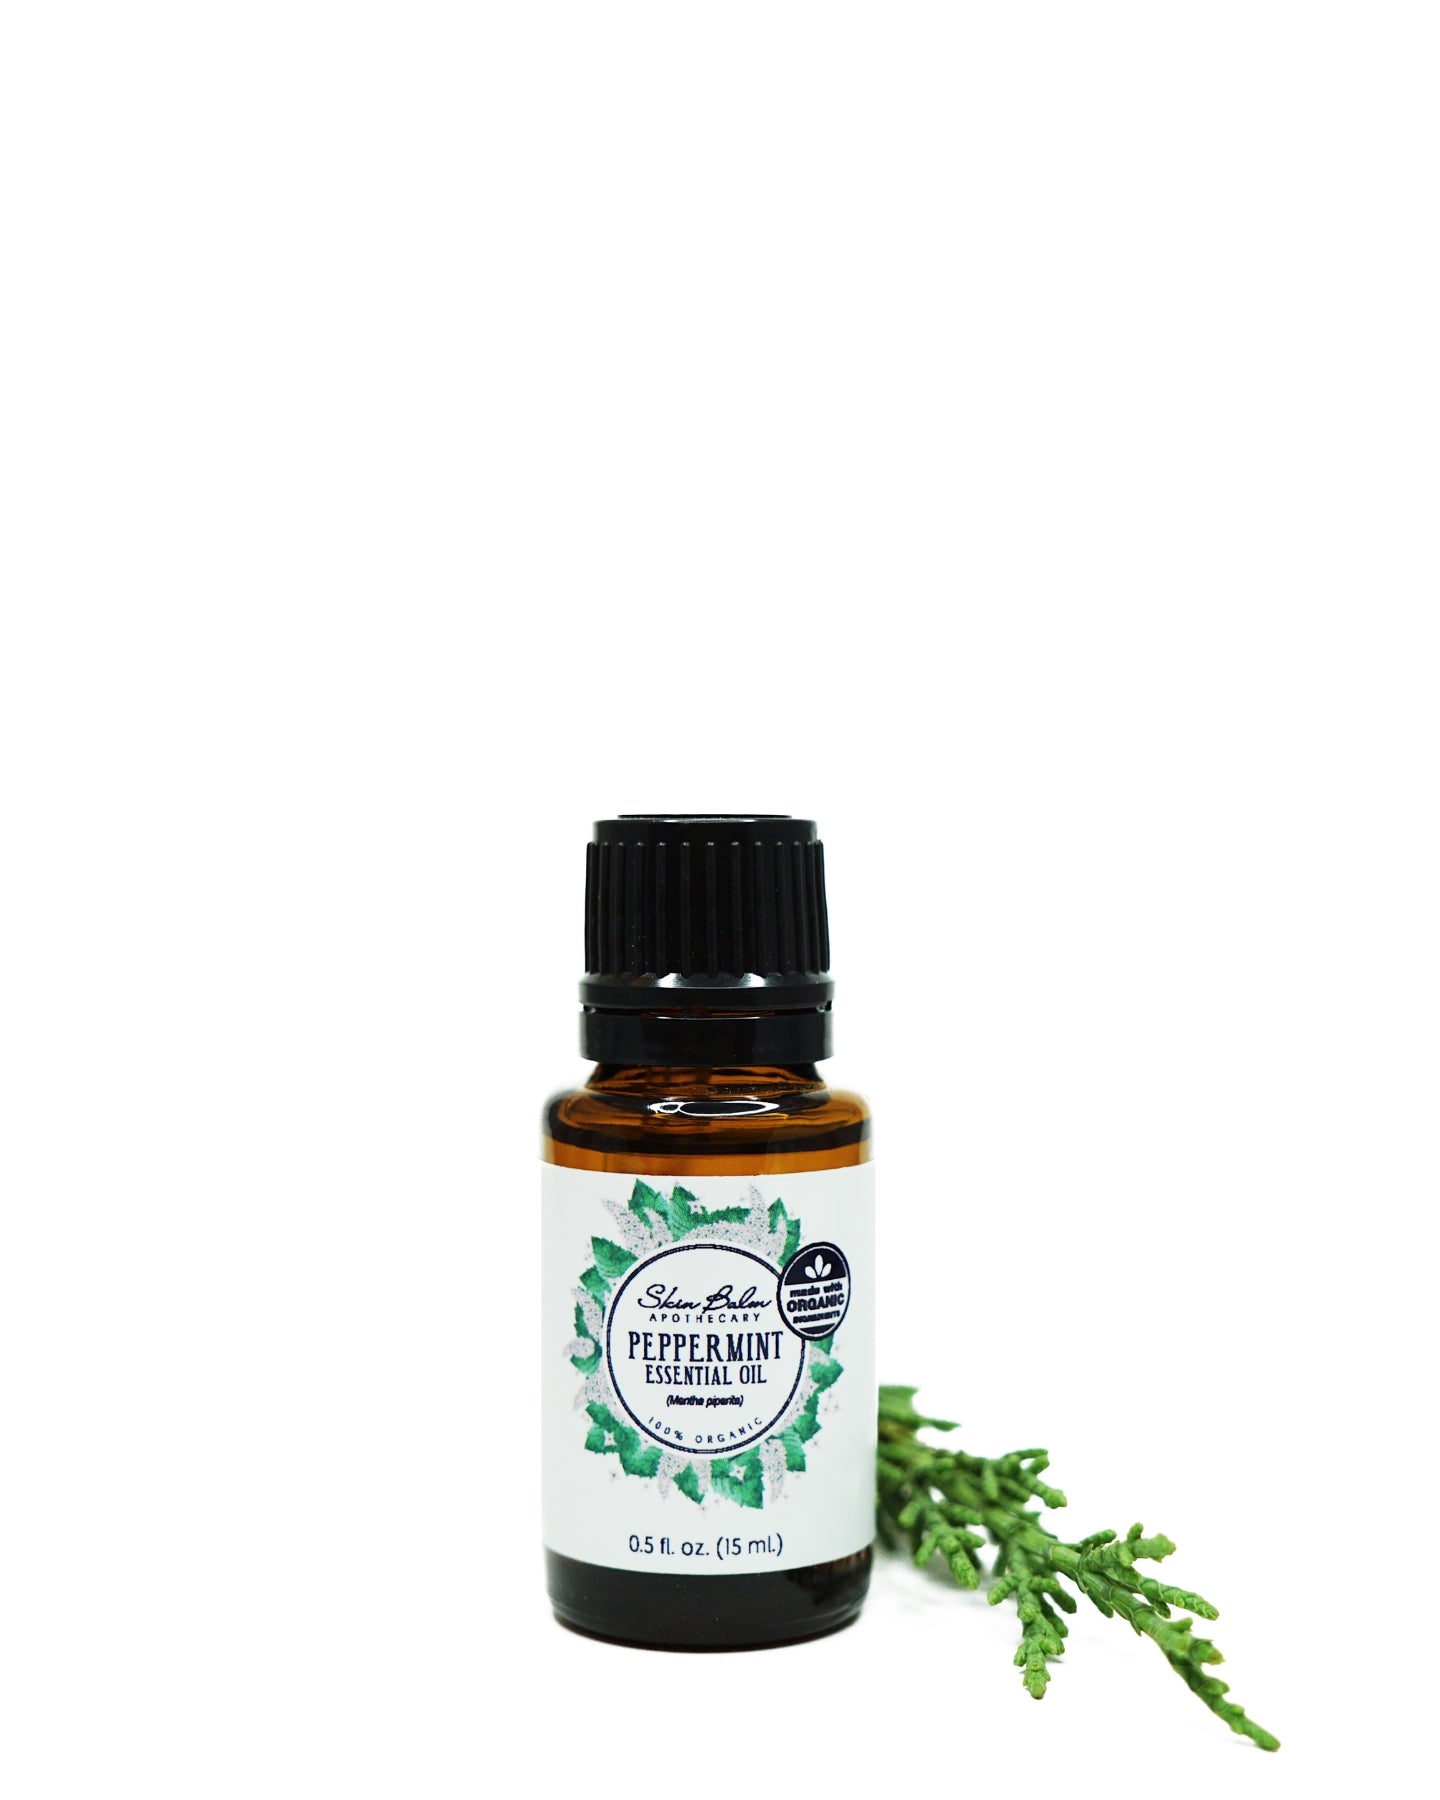 Organic Peppermint Essential Oil with green foliage against a white background.